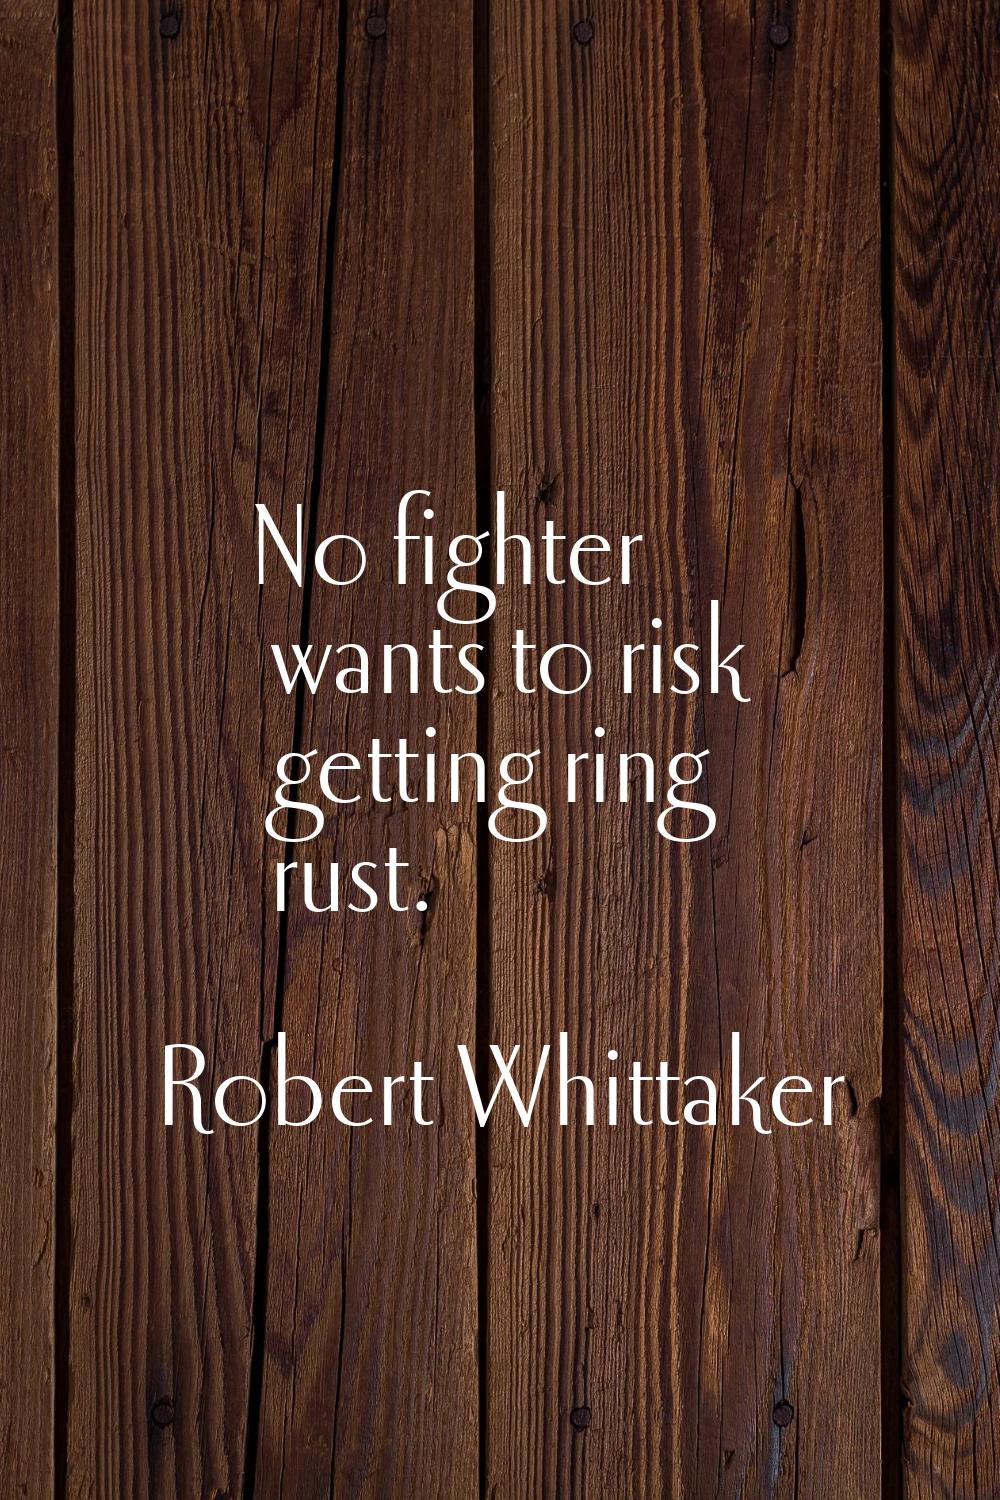 No fighter wants to risk getting ring rust.